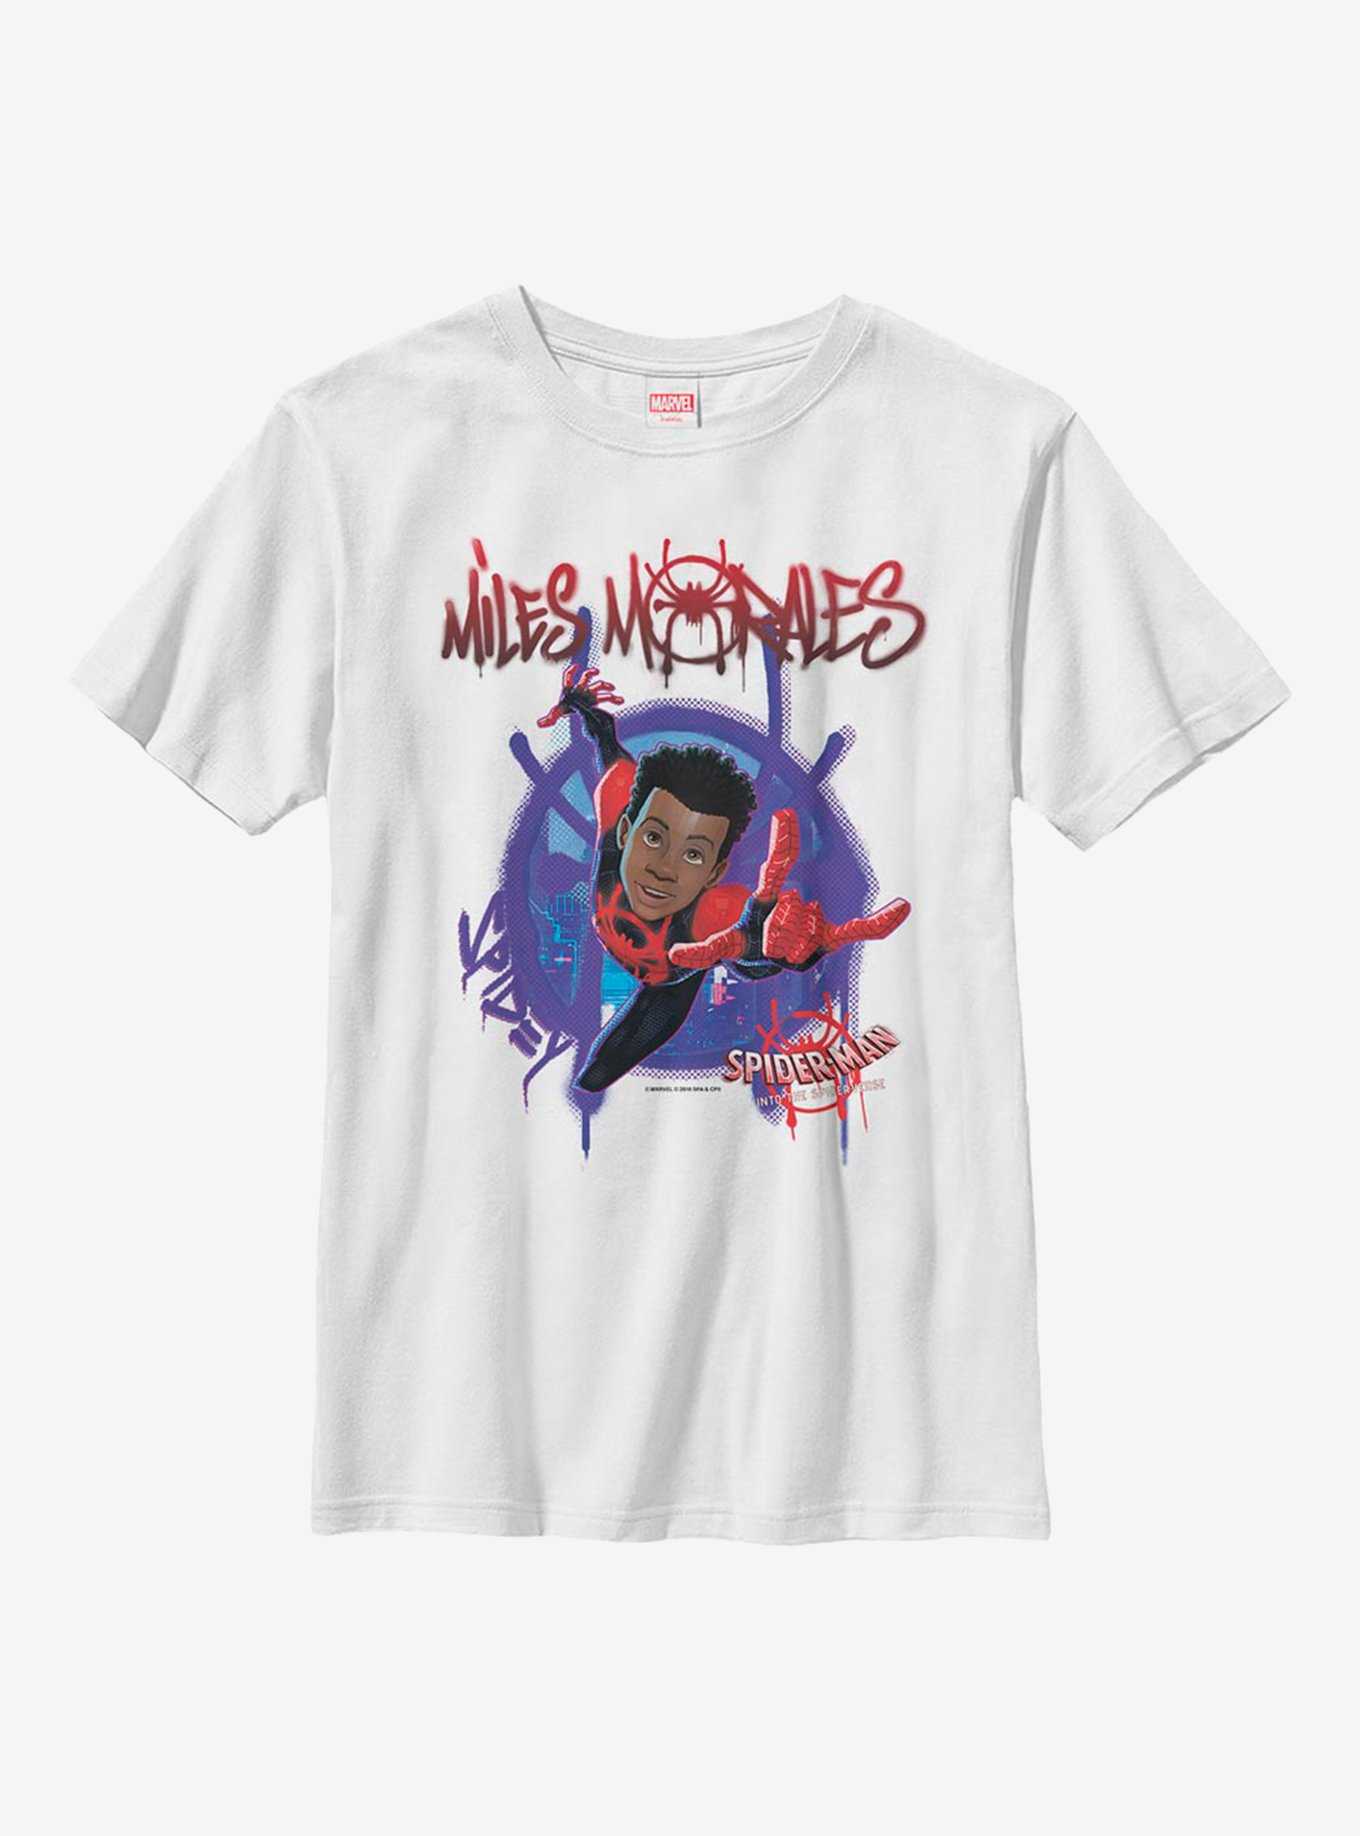 Marvel Spider-Man: Into The Spiderverse Miles Morales Paint Youth T-Shirt, , hi-res